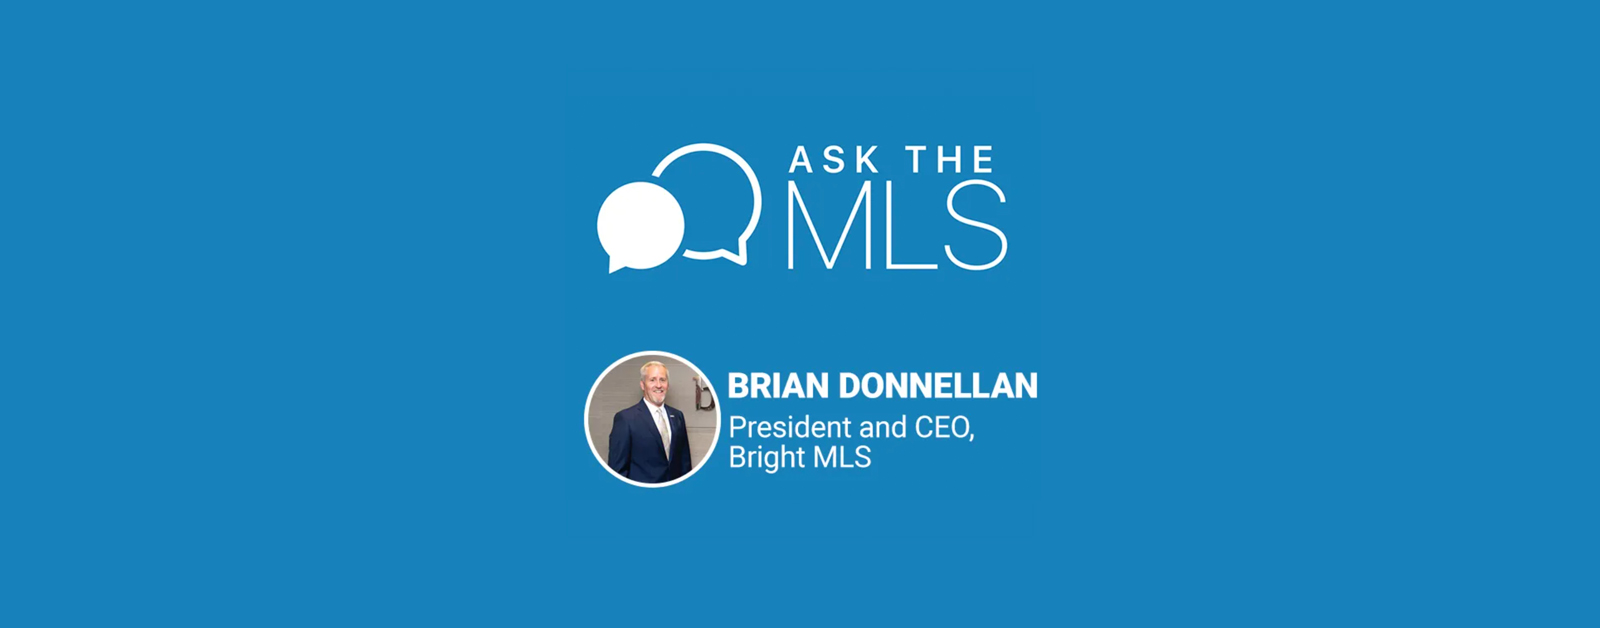 Ask the MLS Brian Donnellan